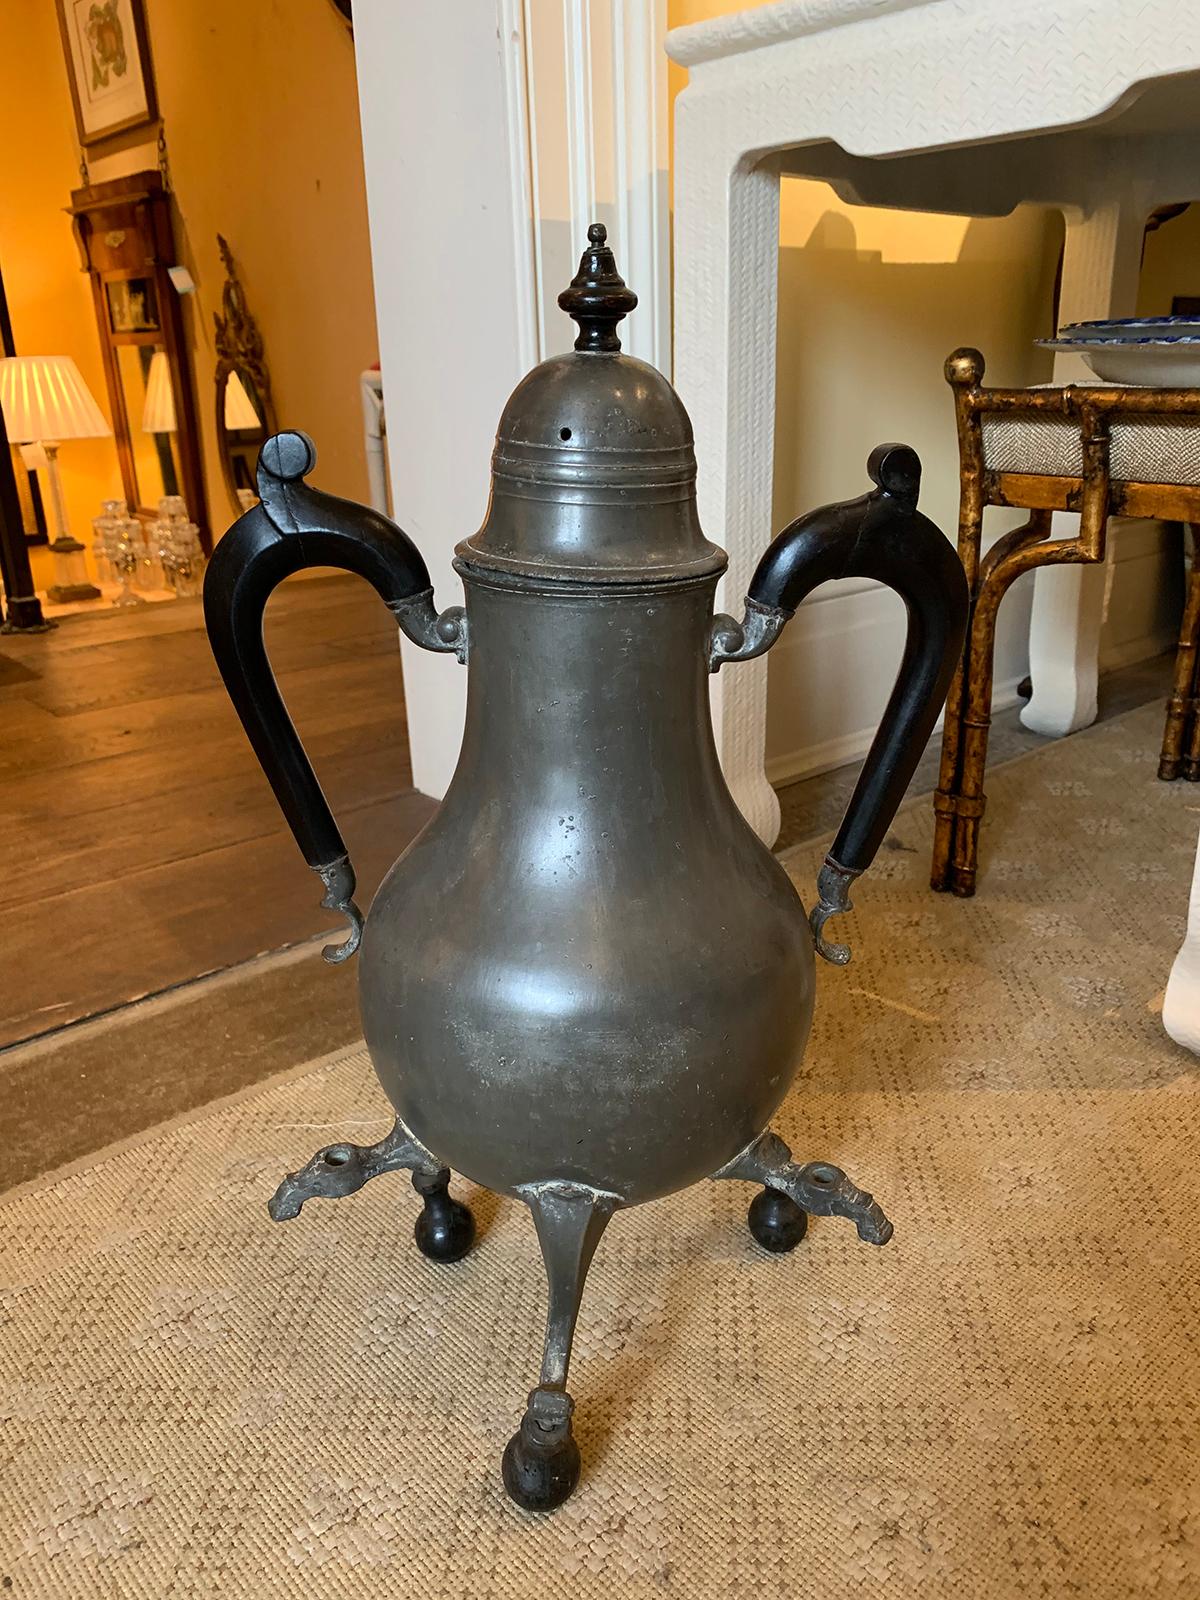 Early 18th-19th century pewter lidded hot water urn, three spouts, wood handles
Measures: Overall: 12